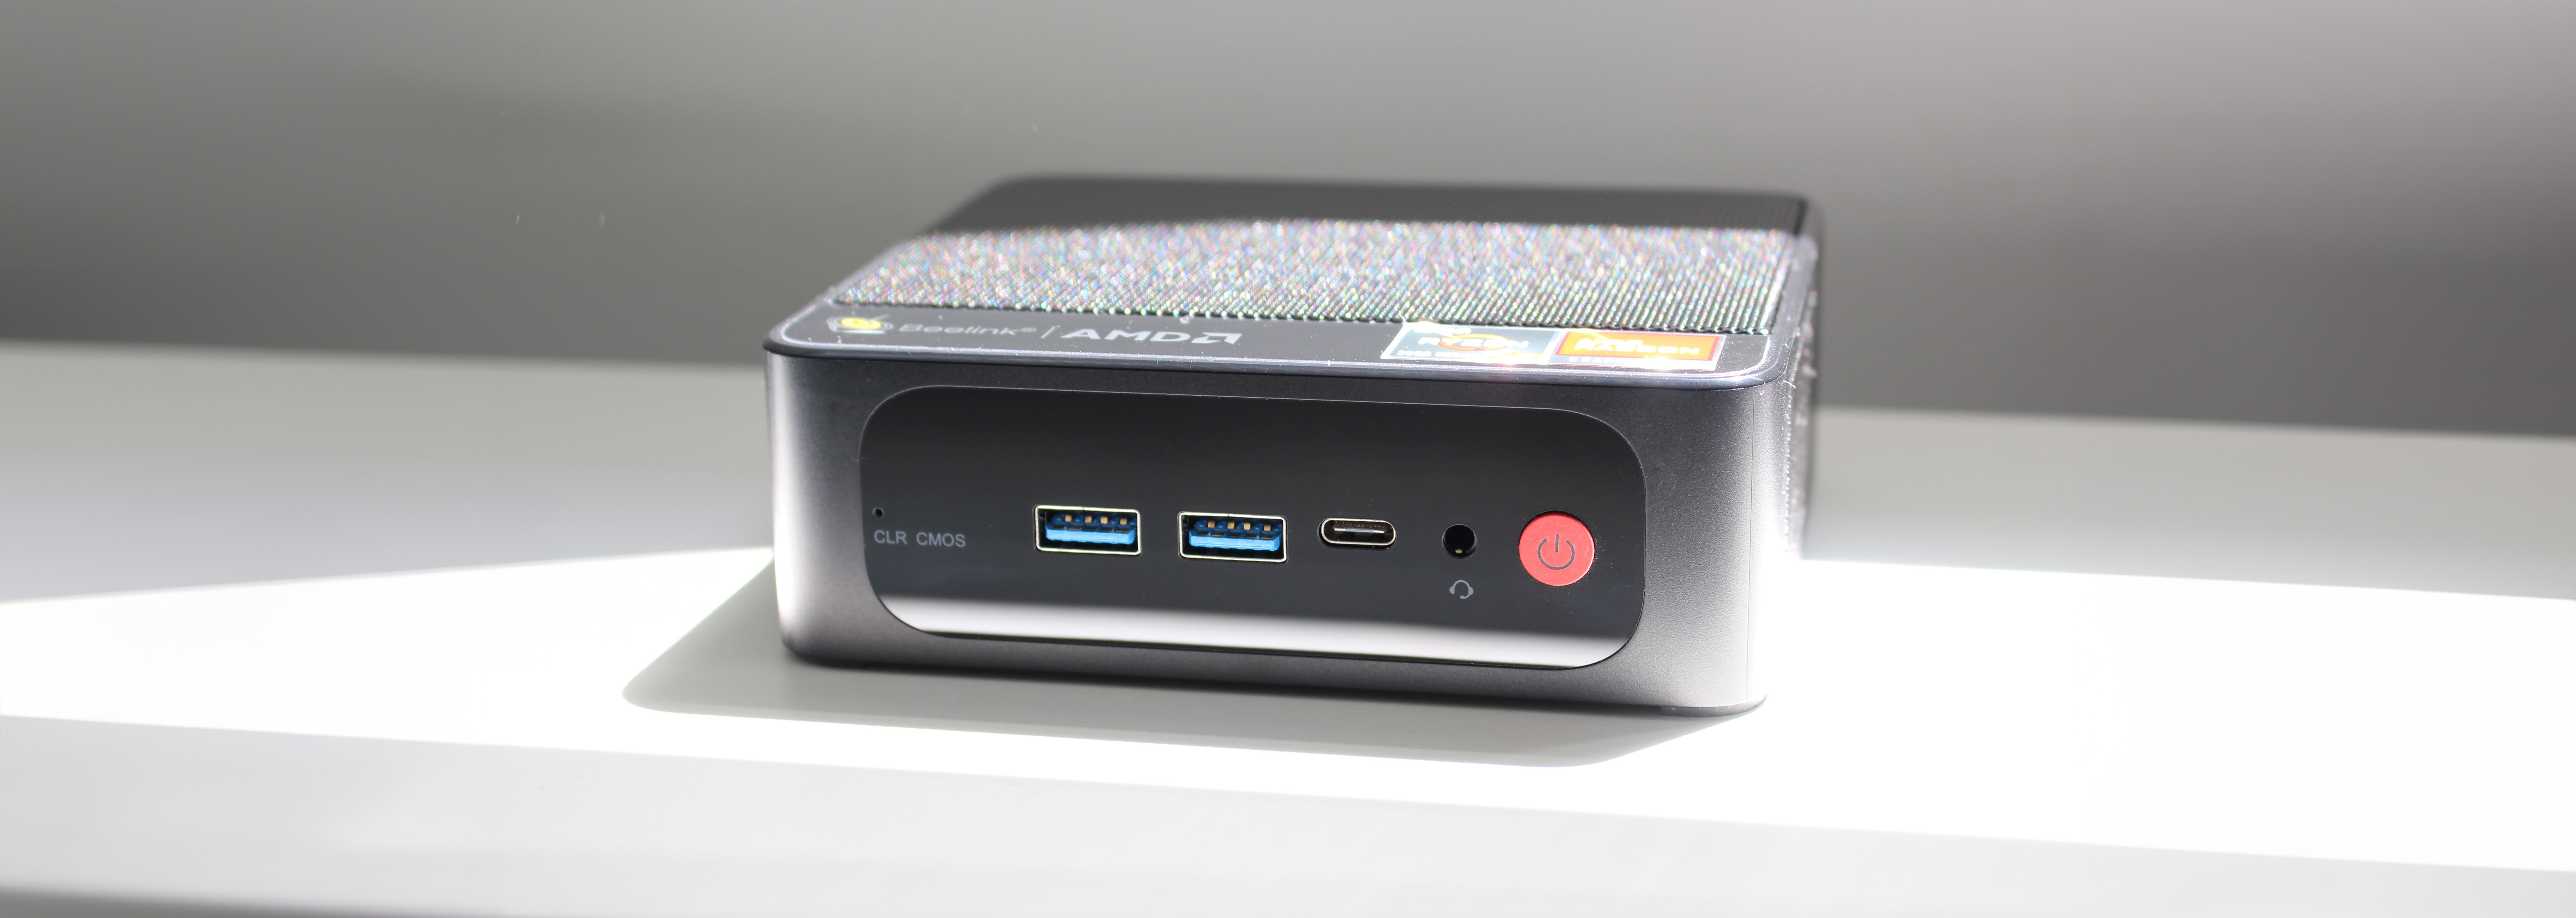 Beelink SER5 Pro 5800H review: Mighty power in a tiny box, just not for